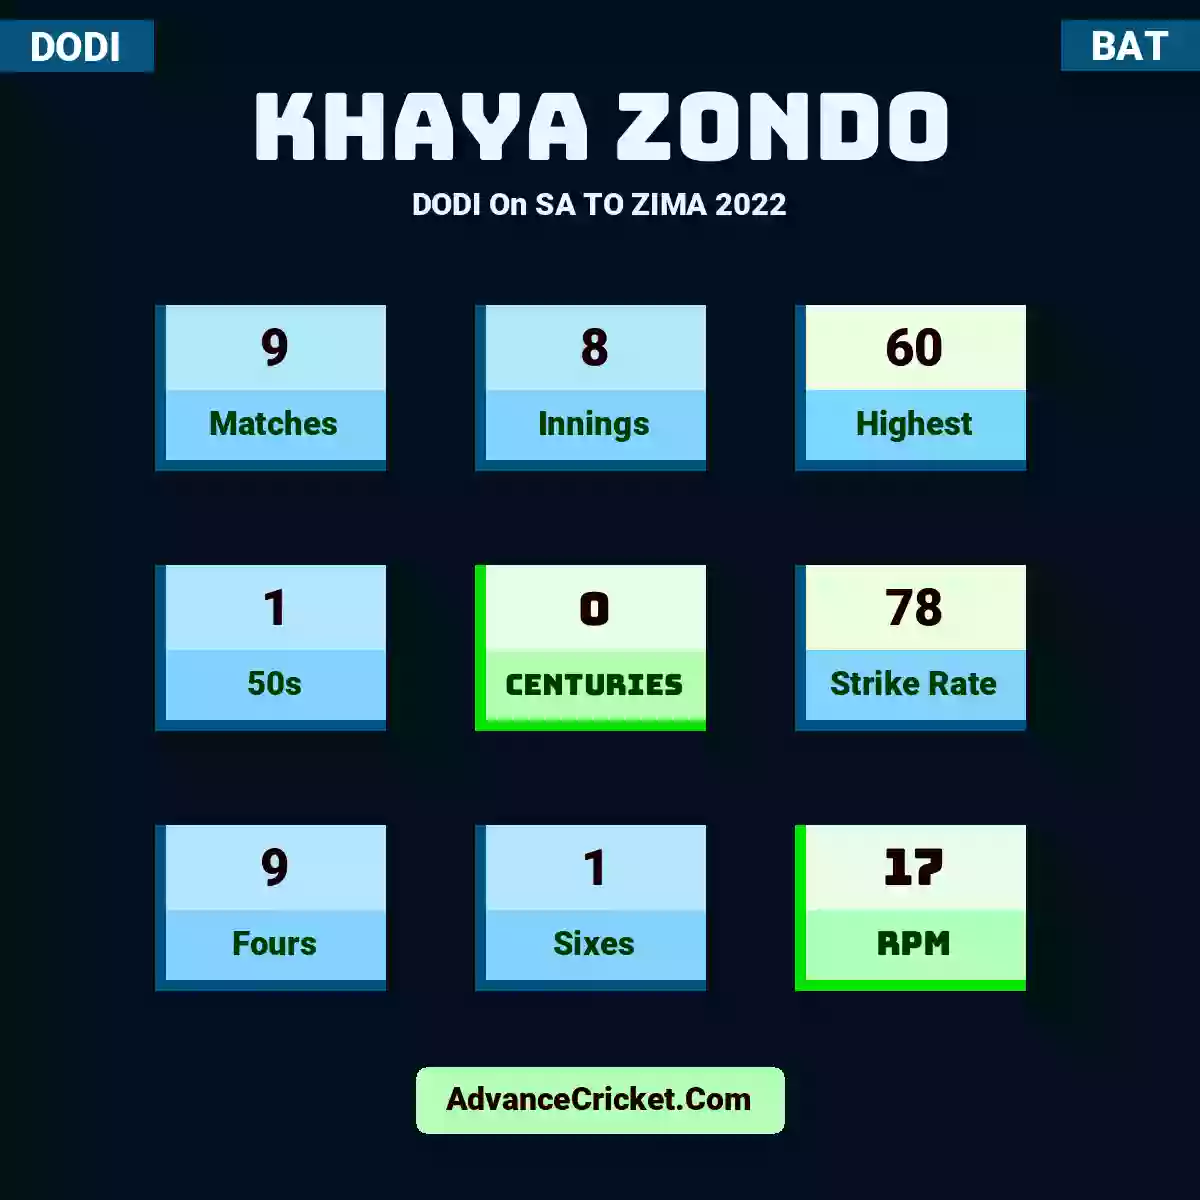 Khaya Zondo DODI  On SA TO ZIMA 2022, Khaya Zondo played 9 matches, scored 60 runs as highest, 1 half-centuries, and 0 centuries, with a strike rate of 78. K.Zondo hit 9 fours and 1 sixes, with an RPM of 17.